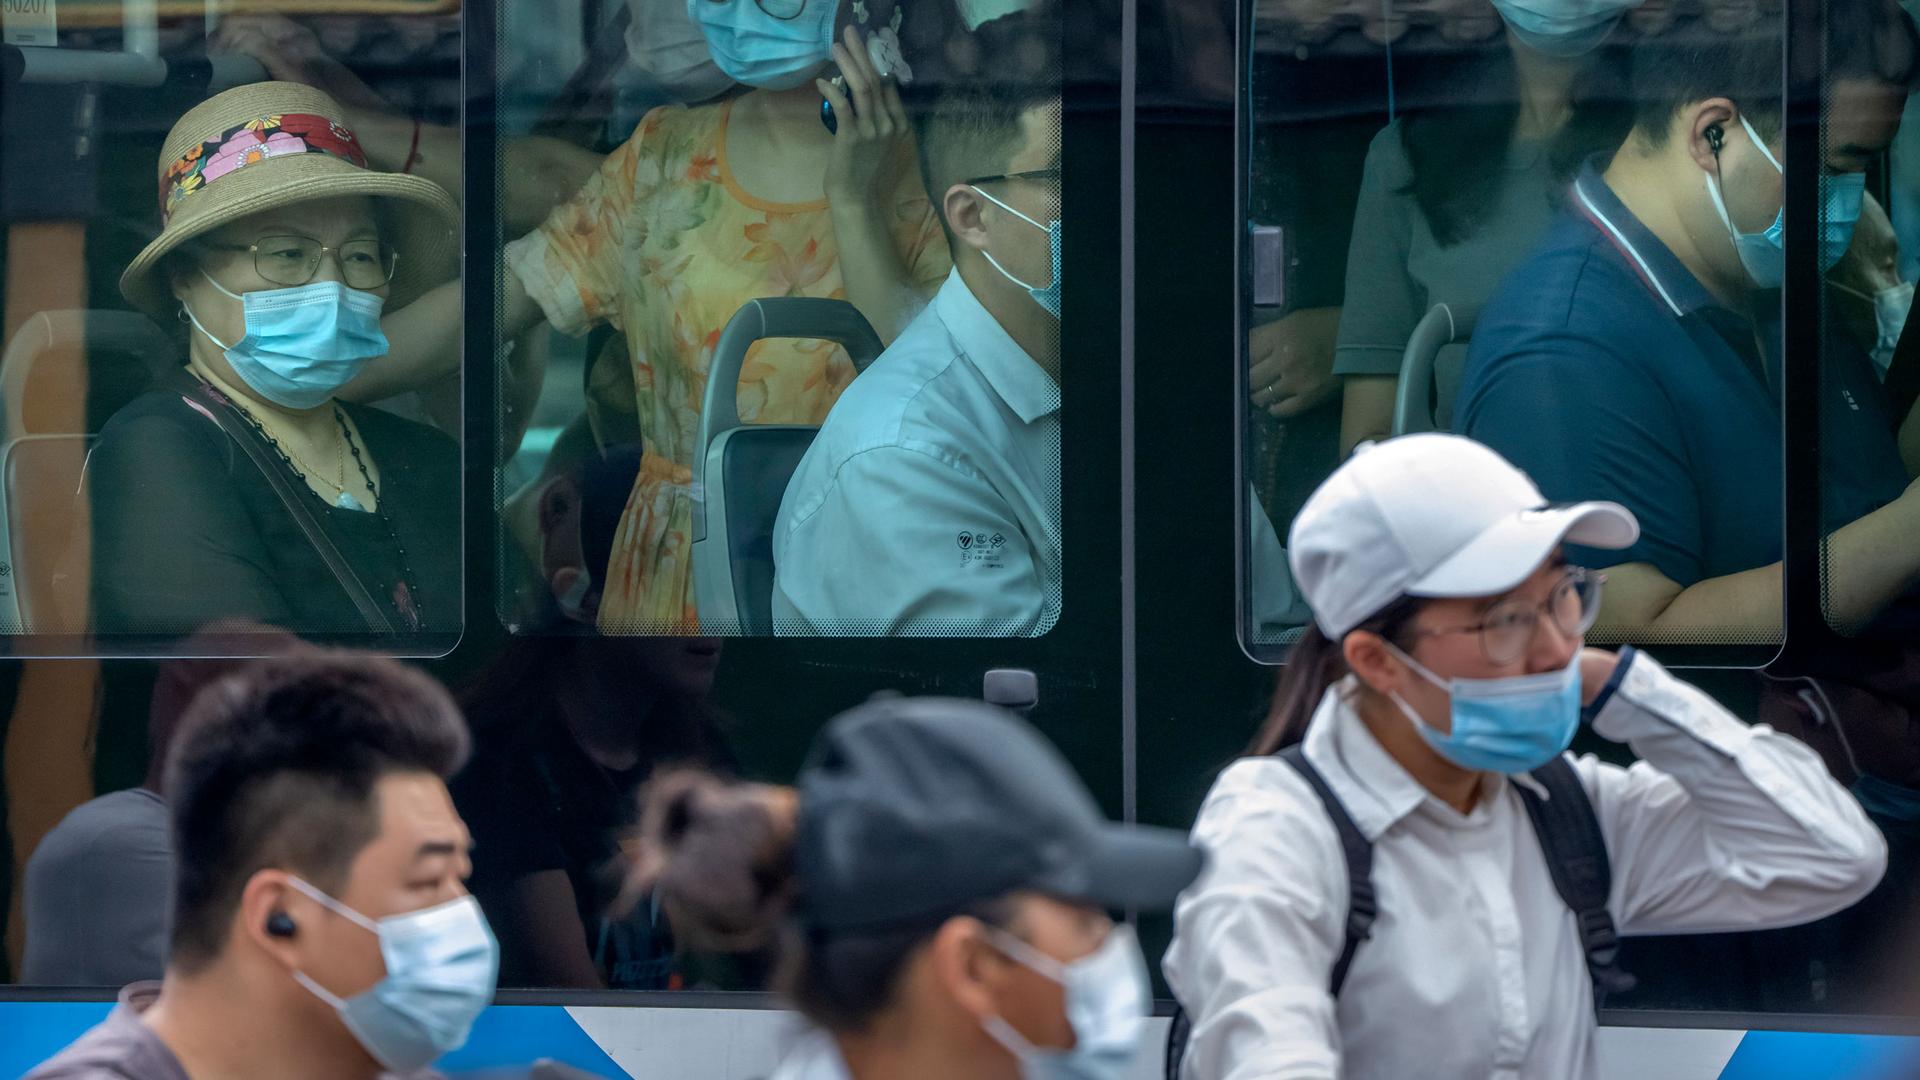 Several people are shown through the window's of a crowded bus with many wearing blue medical masks.